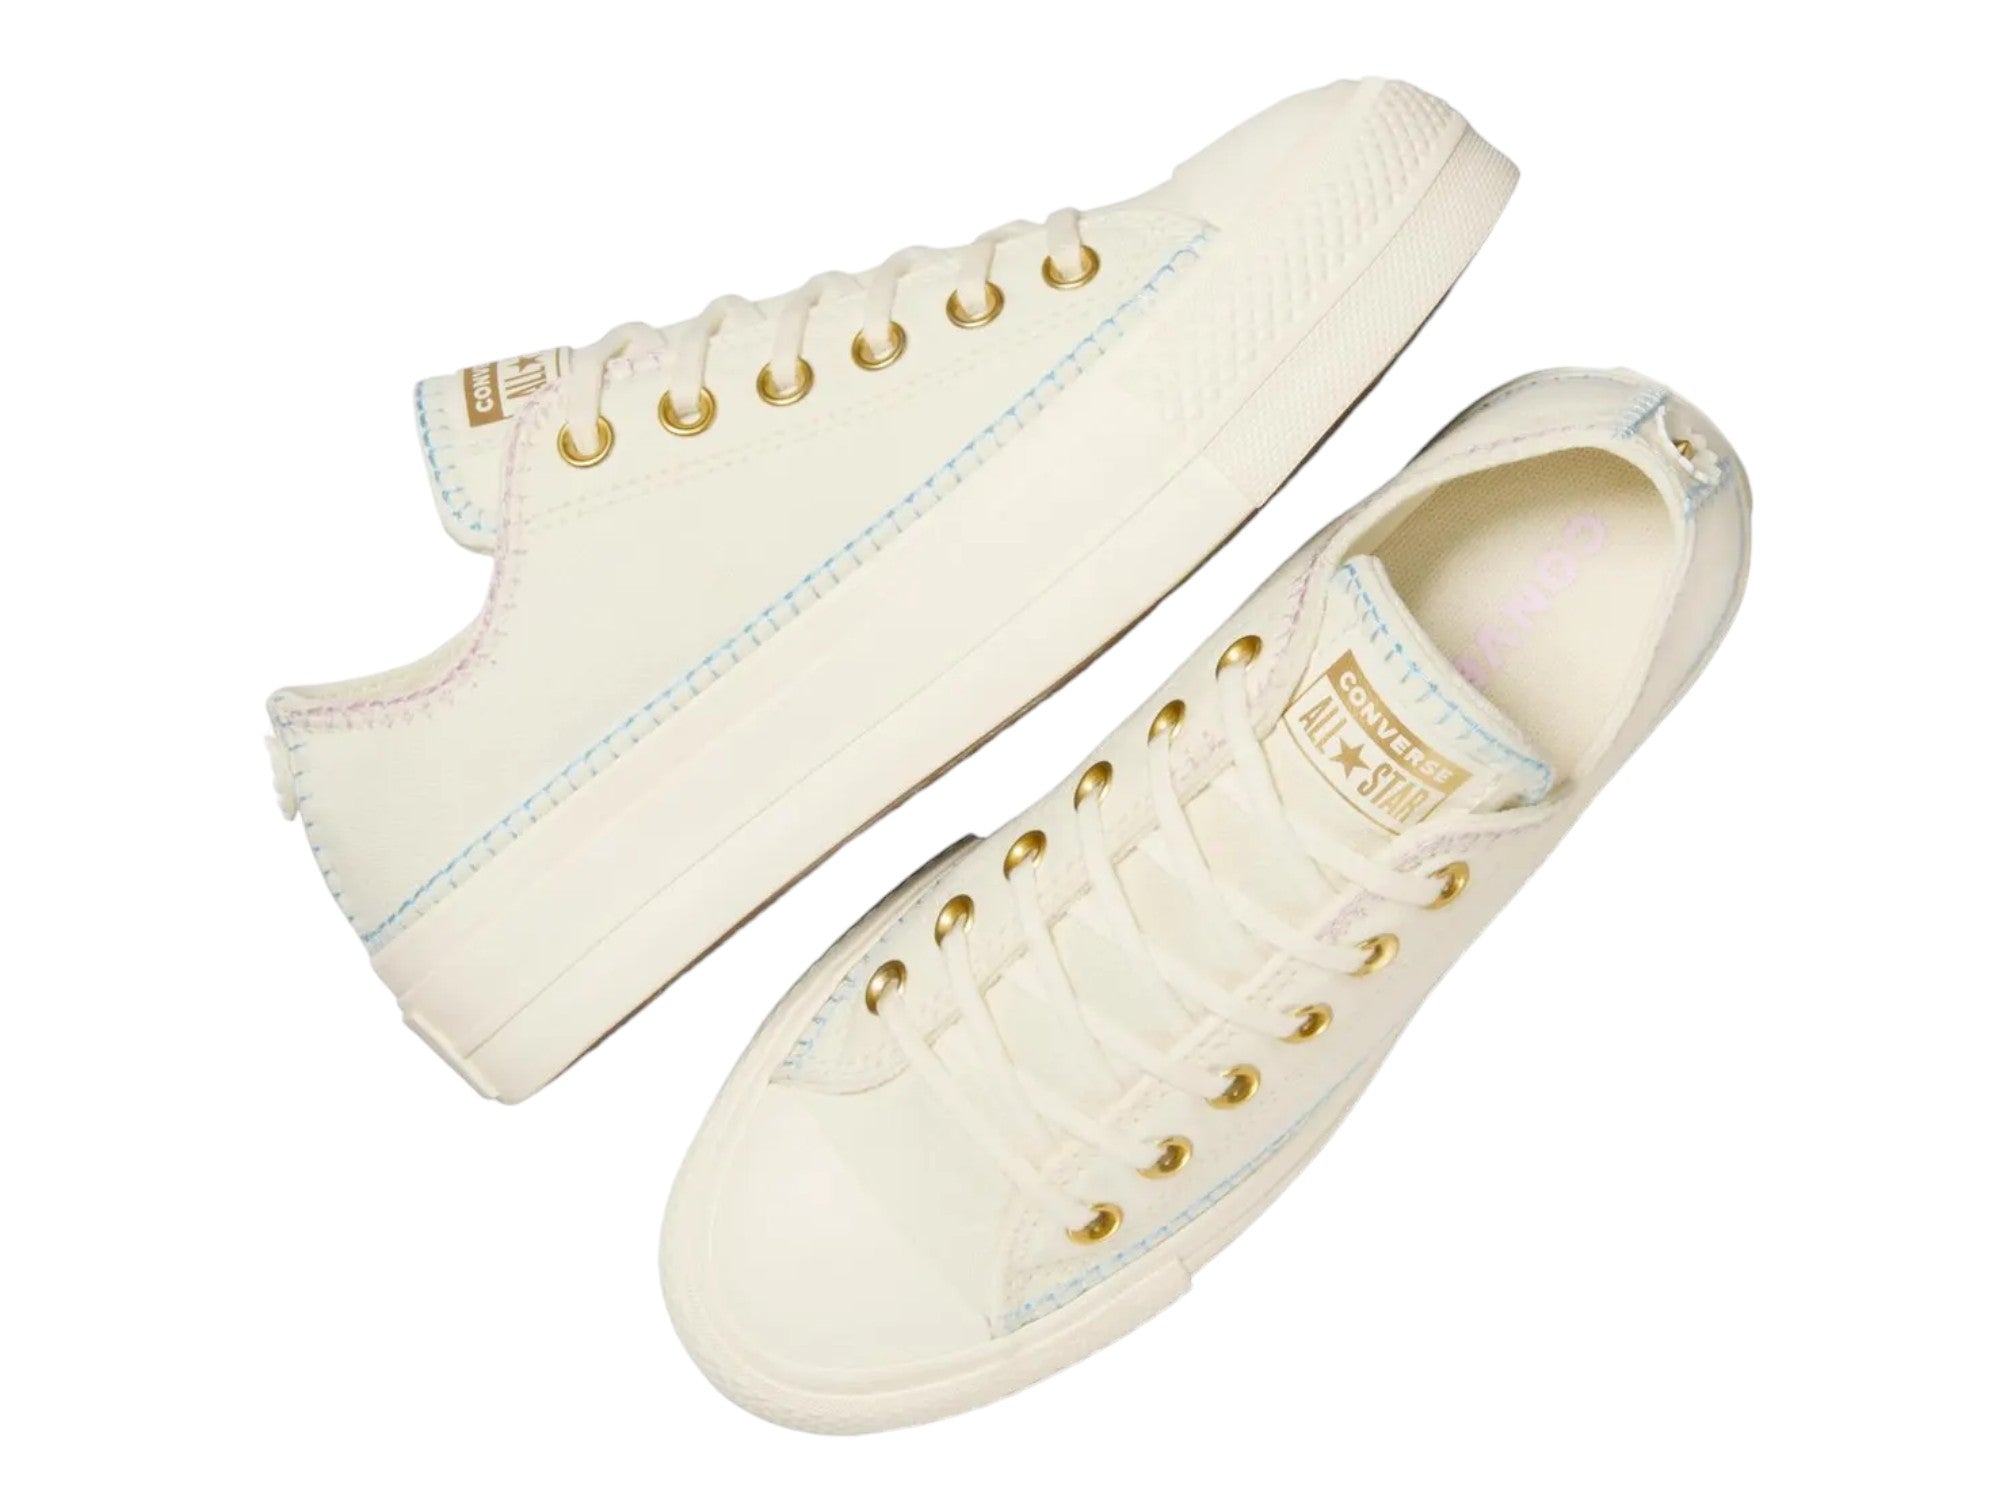 Converse Chuck Taylor Lift Crafted Stitching Low Sneaker - Women's